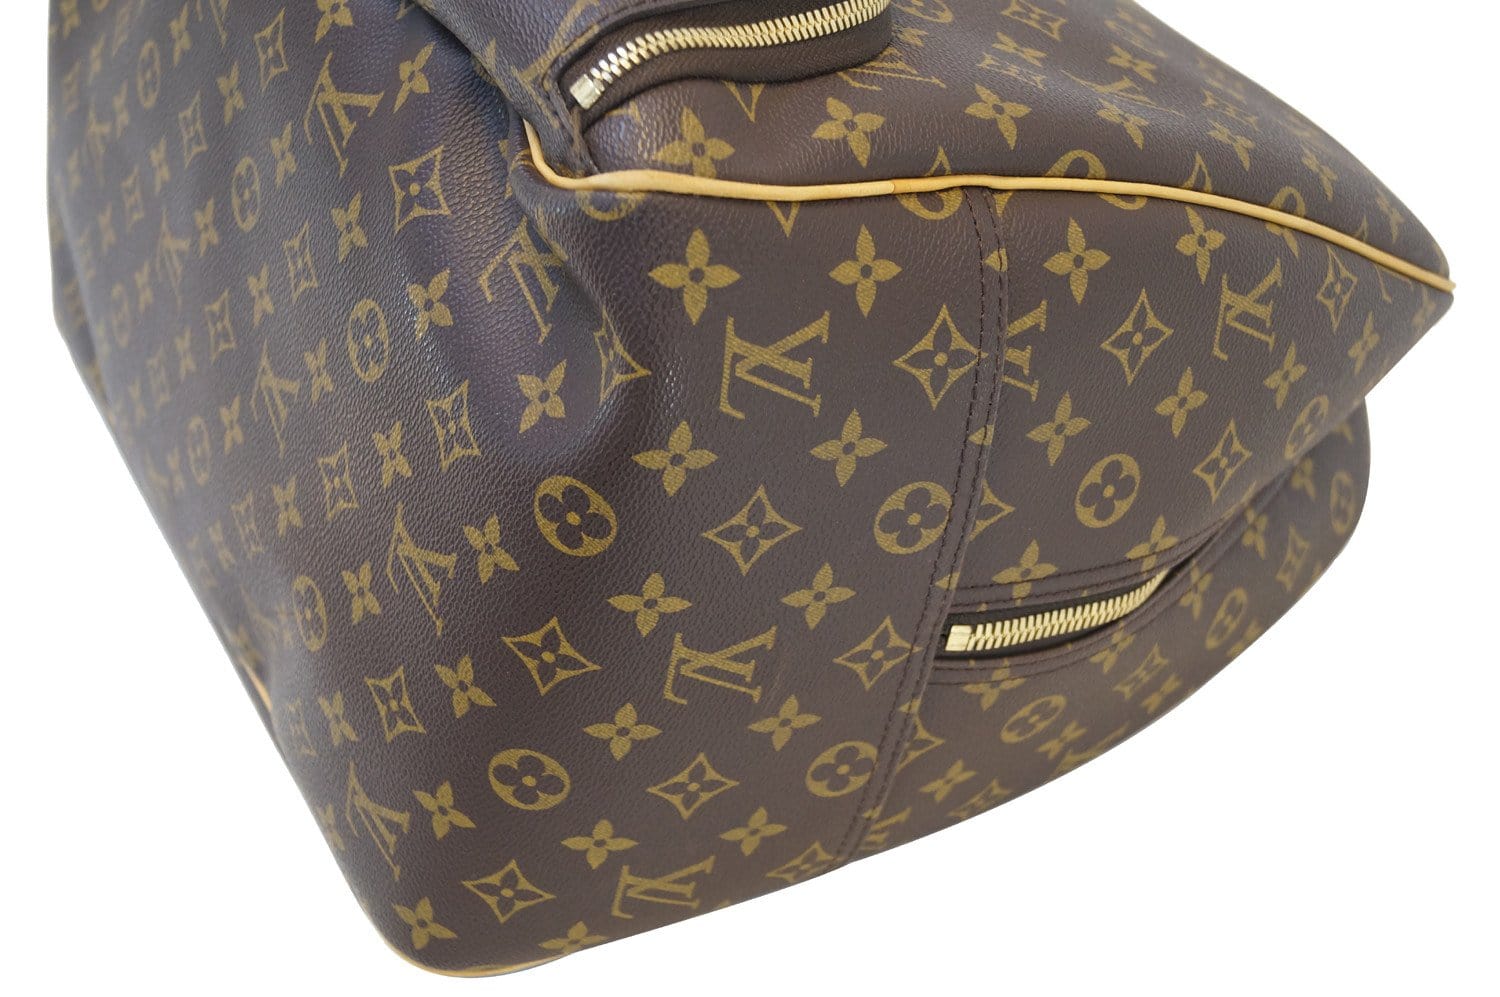 real louis vuitton backpack for women